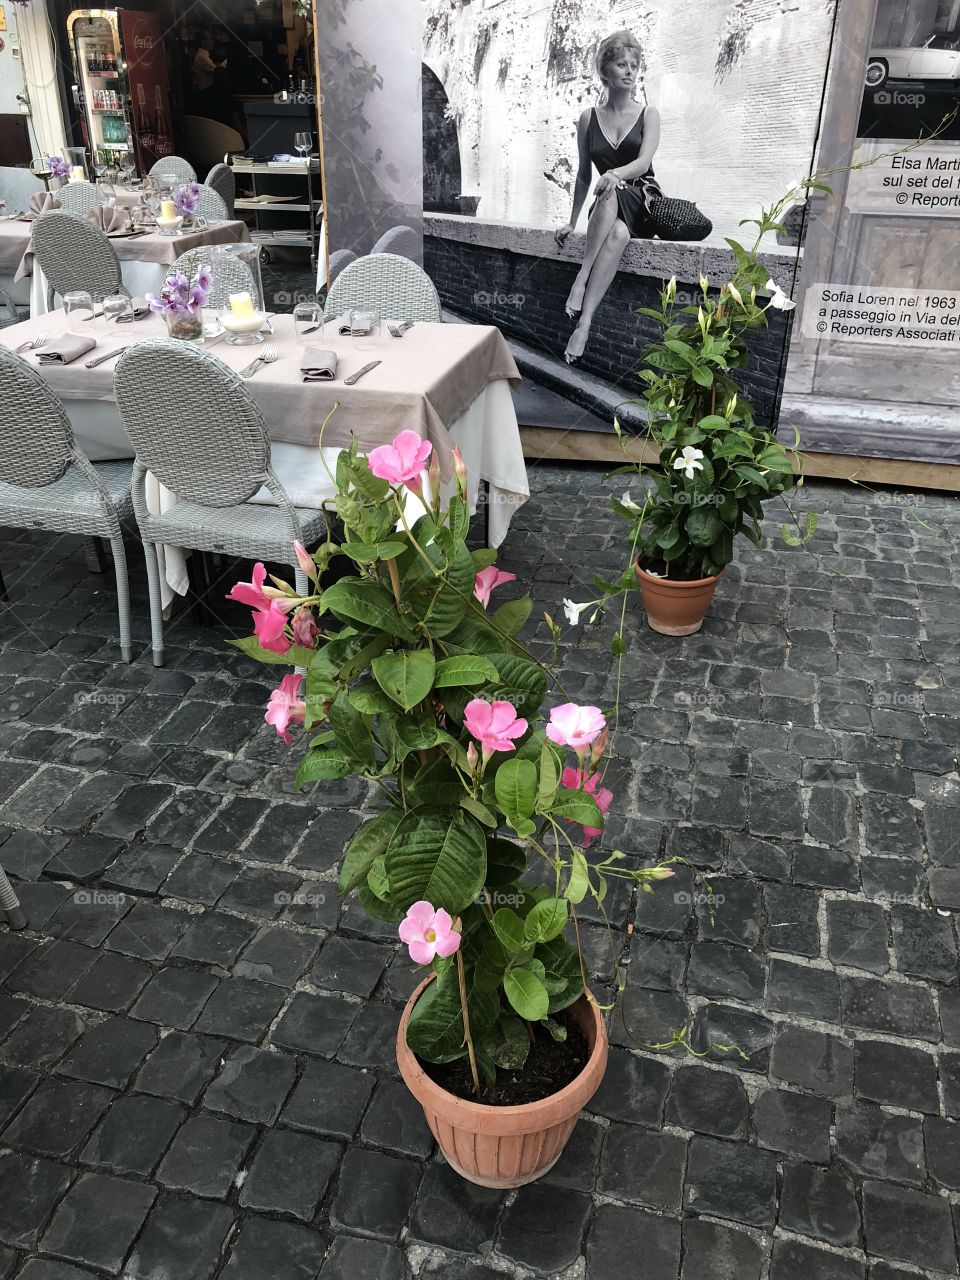 Flowers in a restaurant in rome